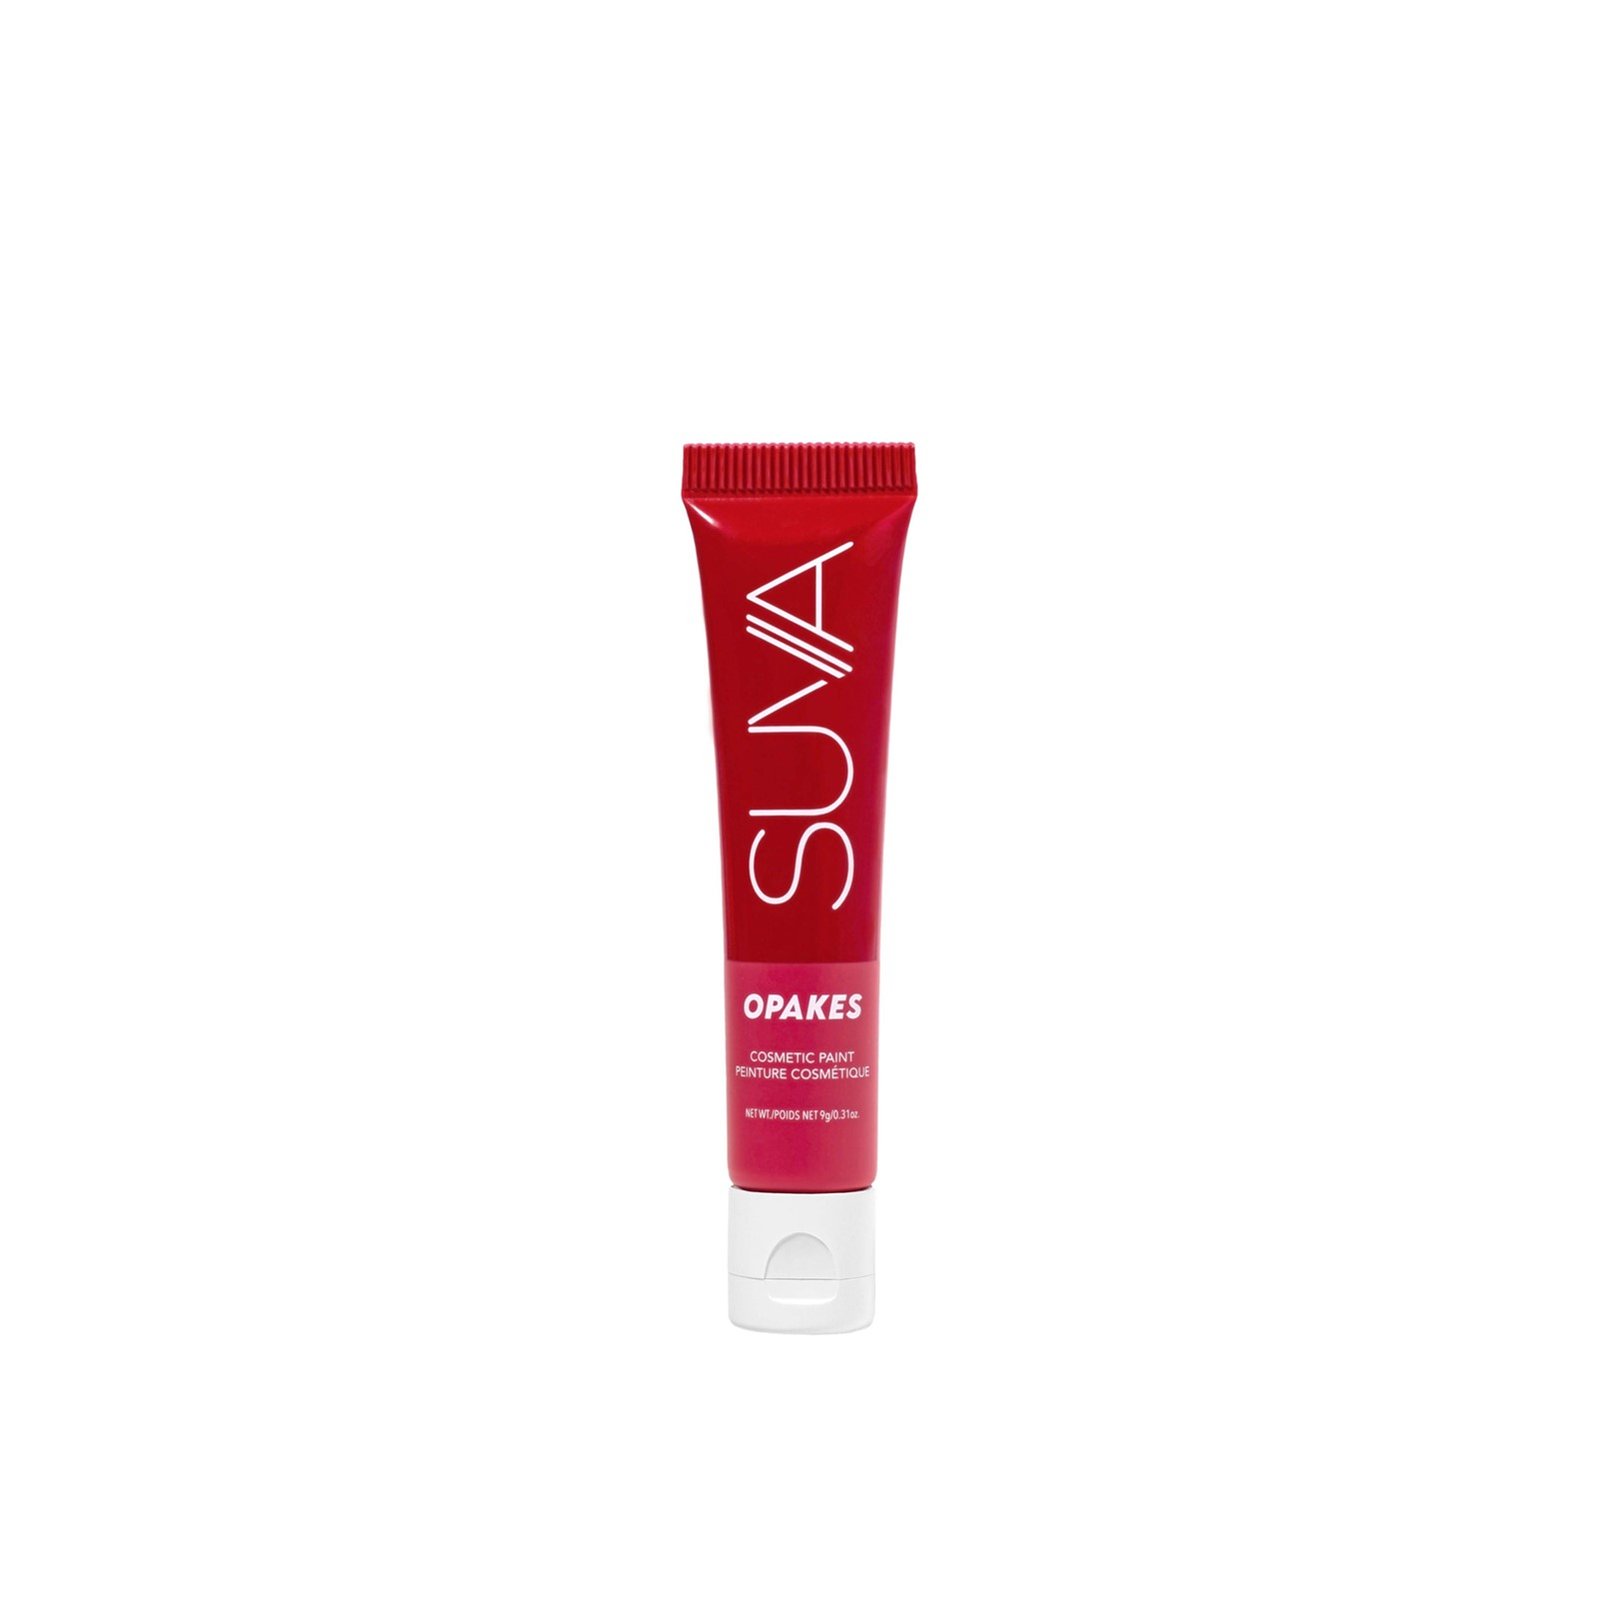 SUVA Beauty Opakes Cosmetic Paint Ragamuffin Red 9g (0.31 oz)